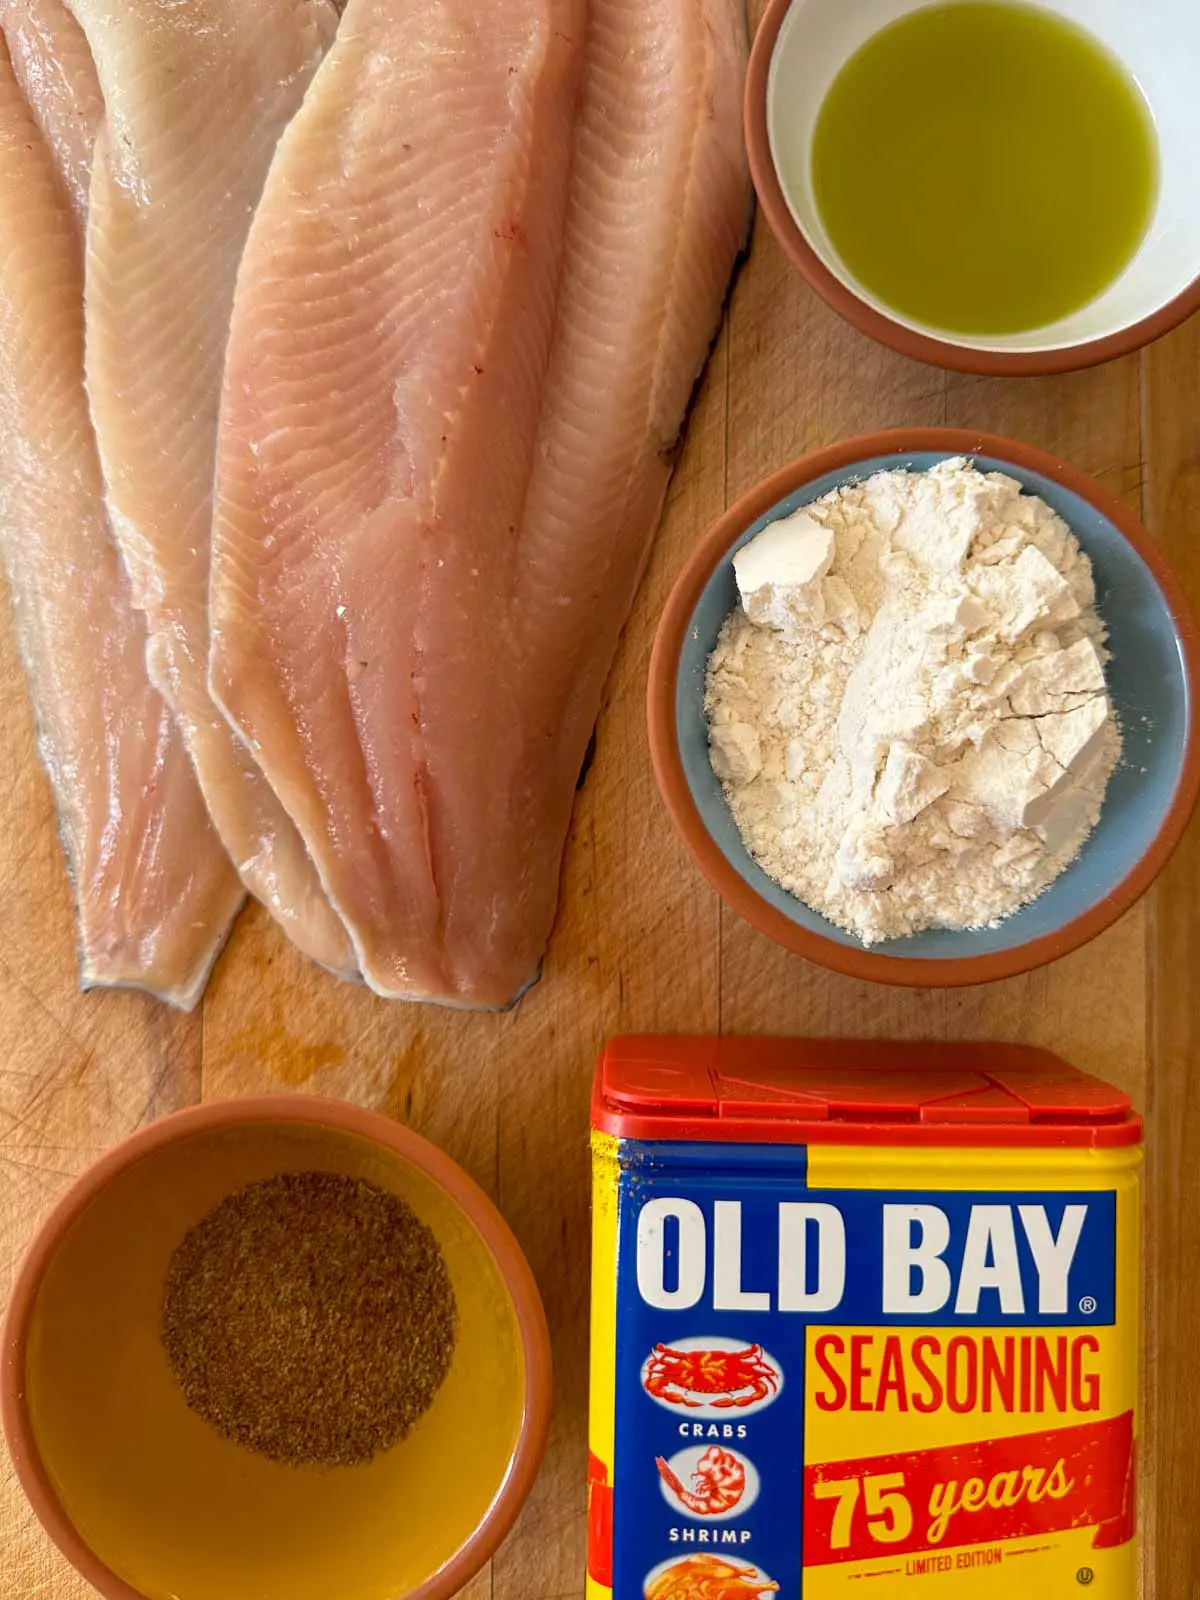 Rainbow trout fillets, bowls filled with olive oil, flour, and Old Bay Seasoning, and a container of Old Bay Seasoning.